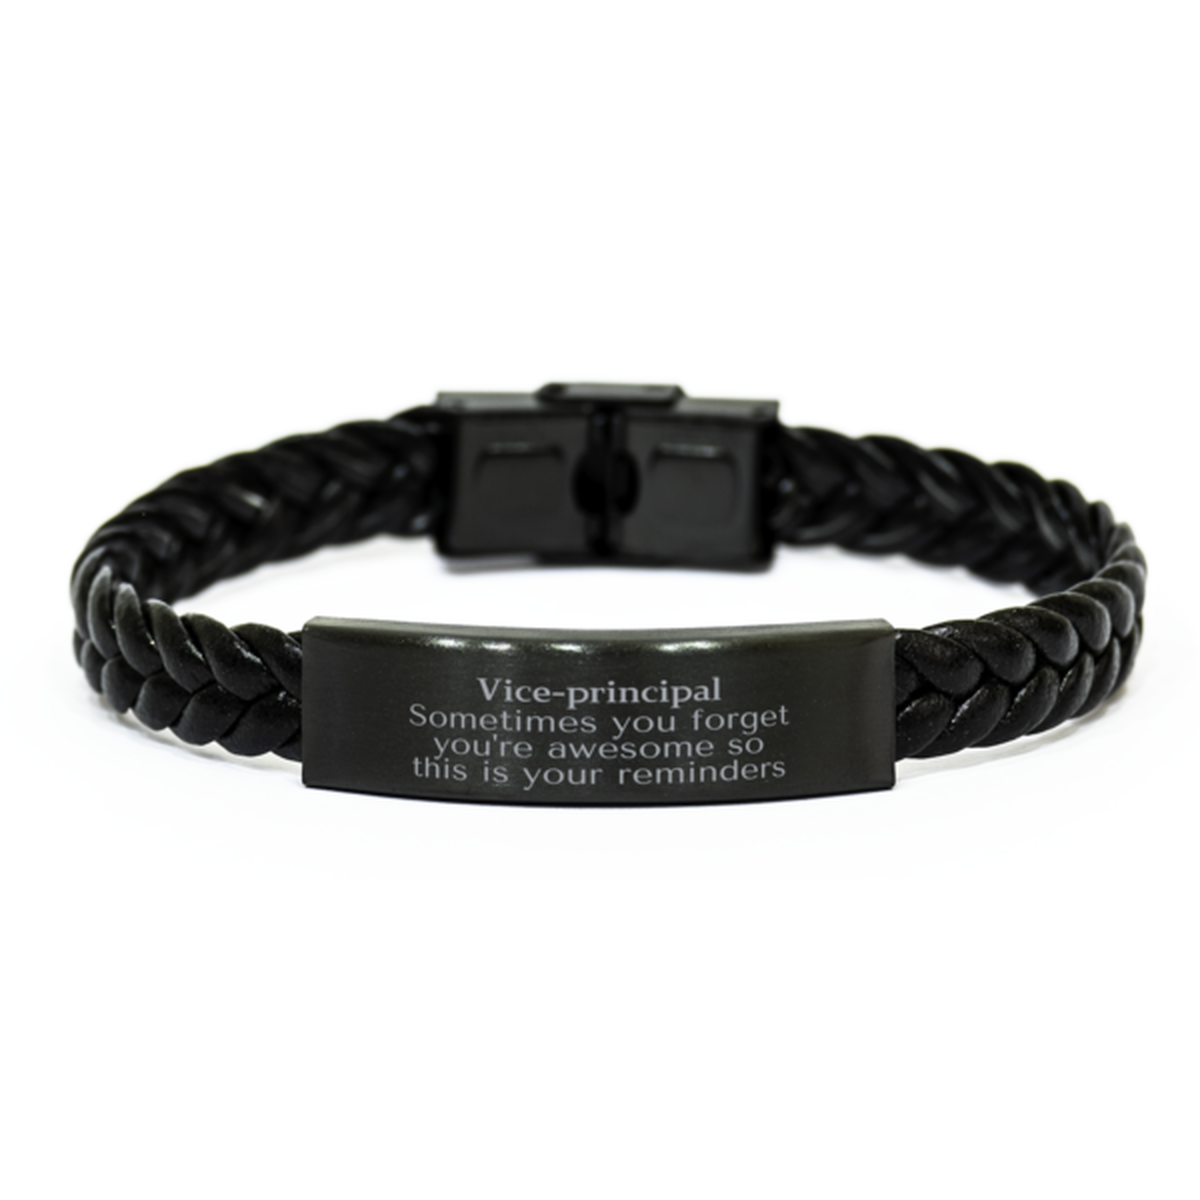 Sentimental Vice-principal Braided Leather Bracelet, Vice-principal Sometimes you forget you're awesome so this is your reminders, Graduation Christmas Birthday Gifts for Vice-principal, Men, Women, Coworkers